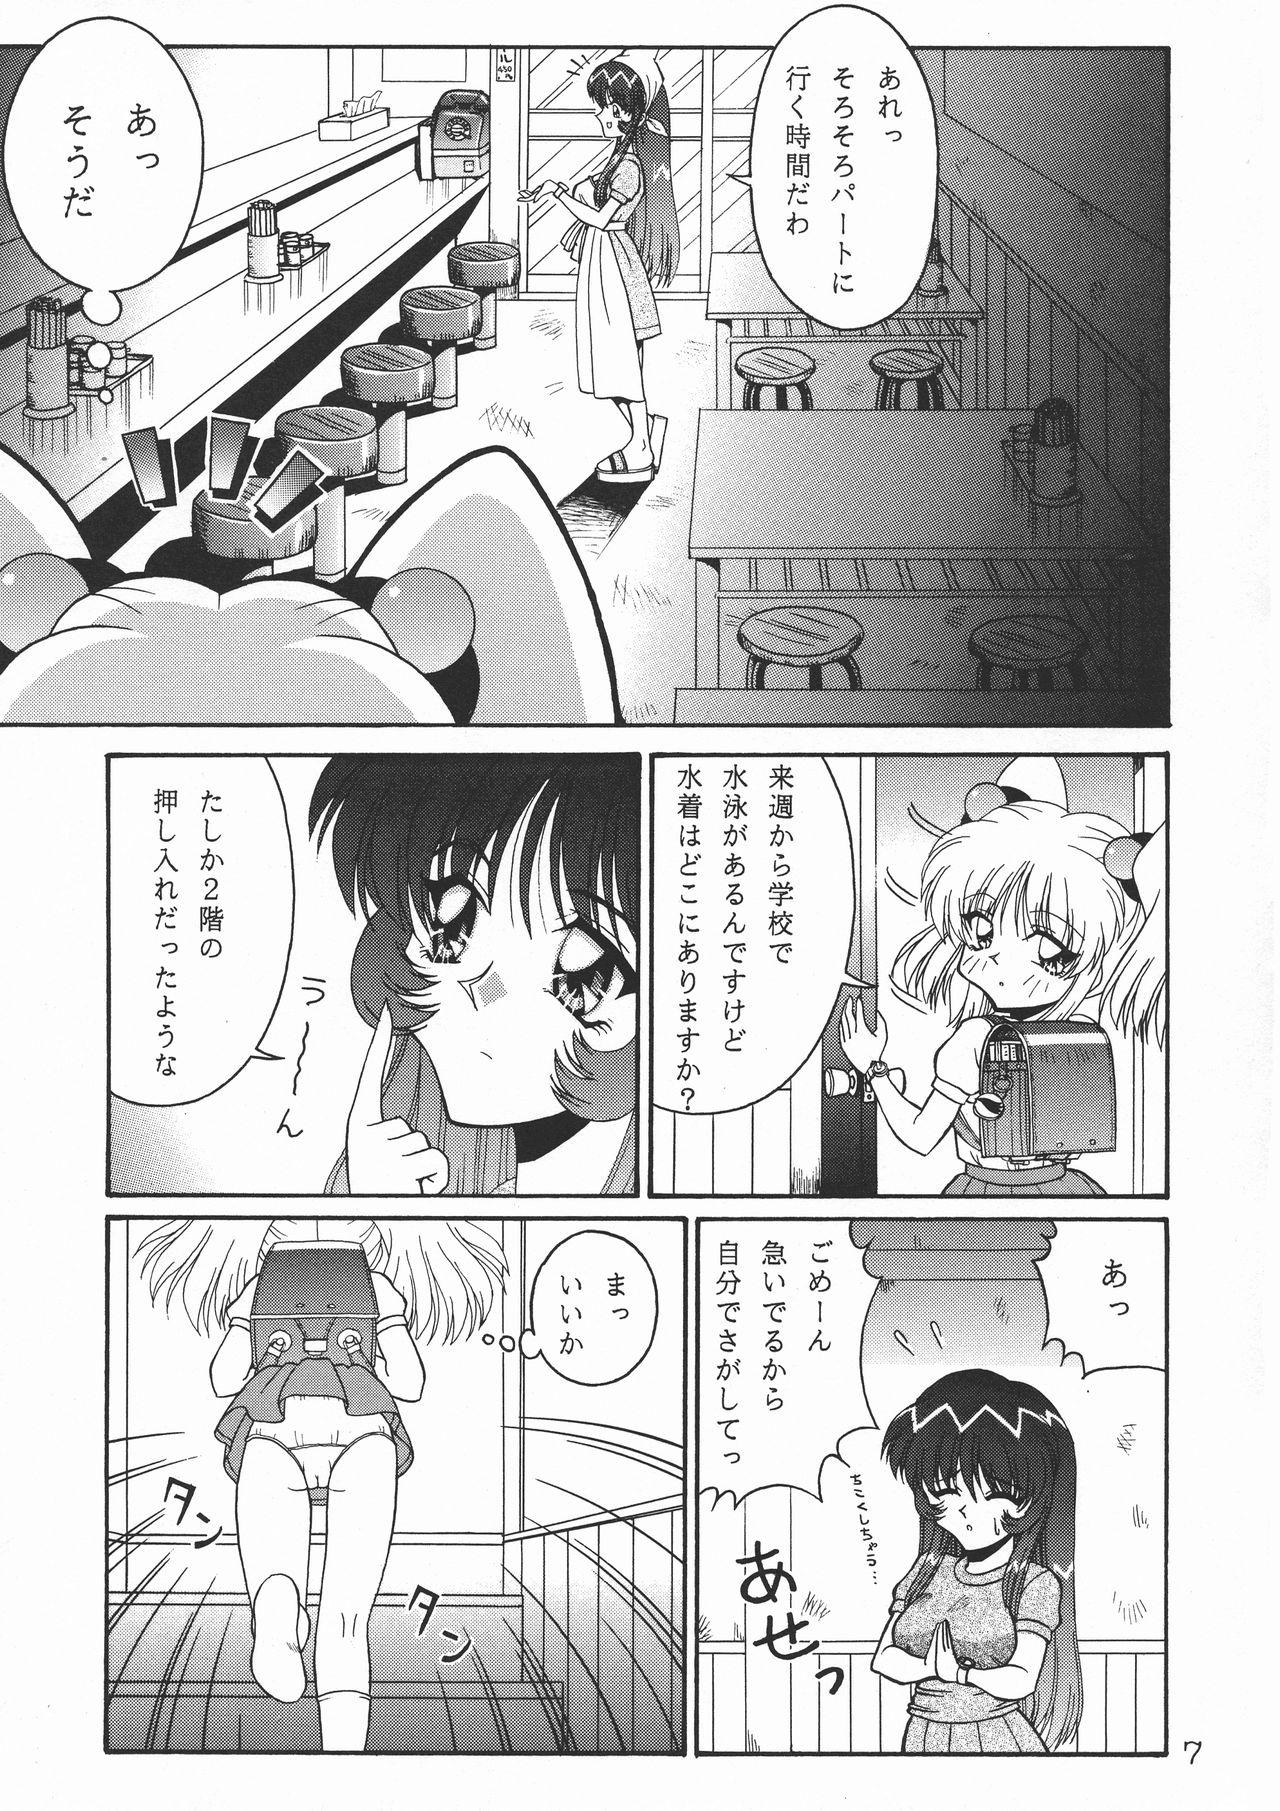 Screaming TOKUTEI 7 - Martian successor nadesico Camgirls - Page 7